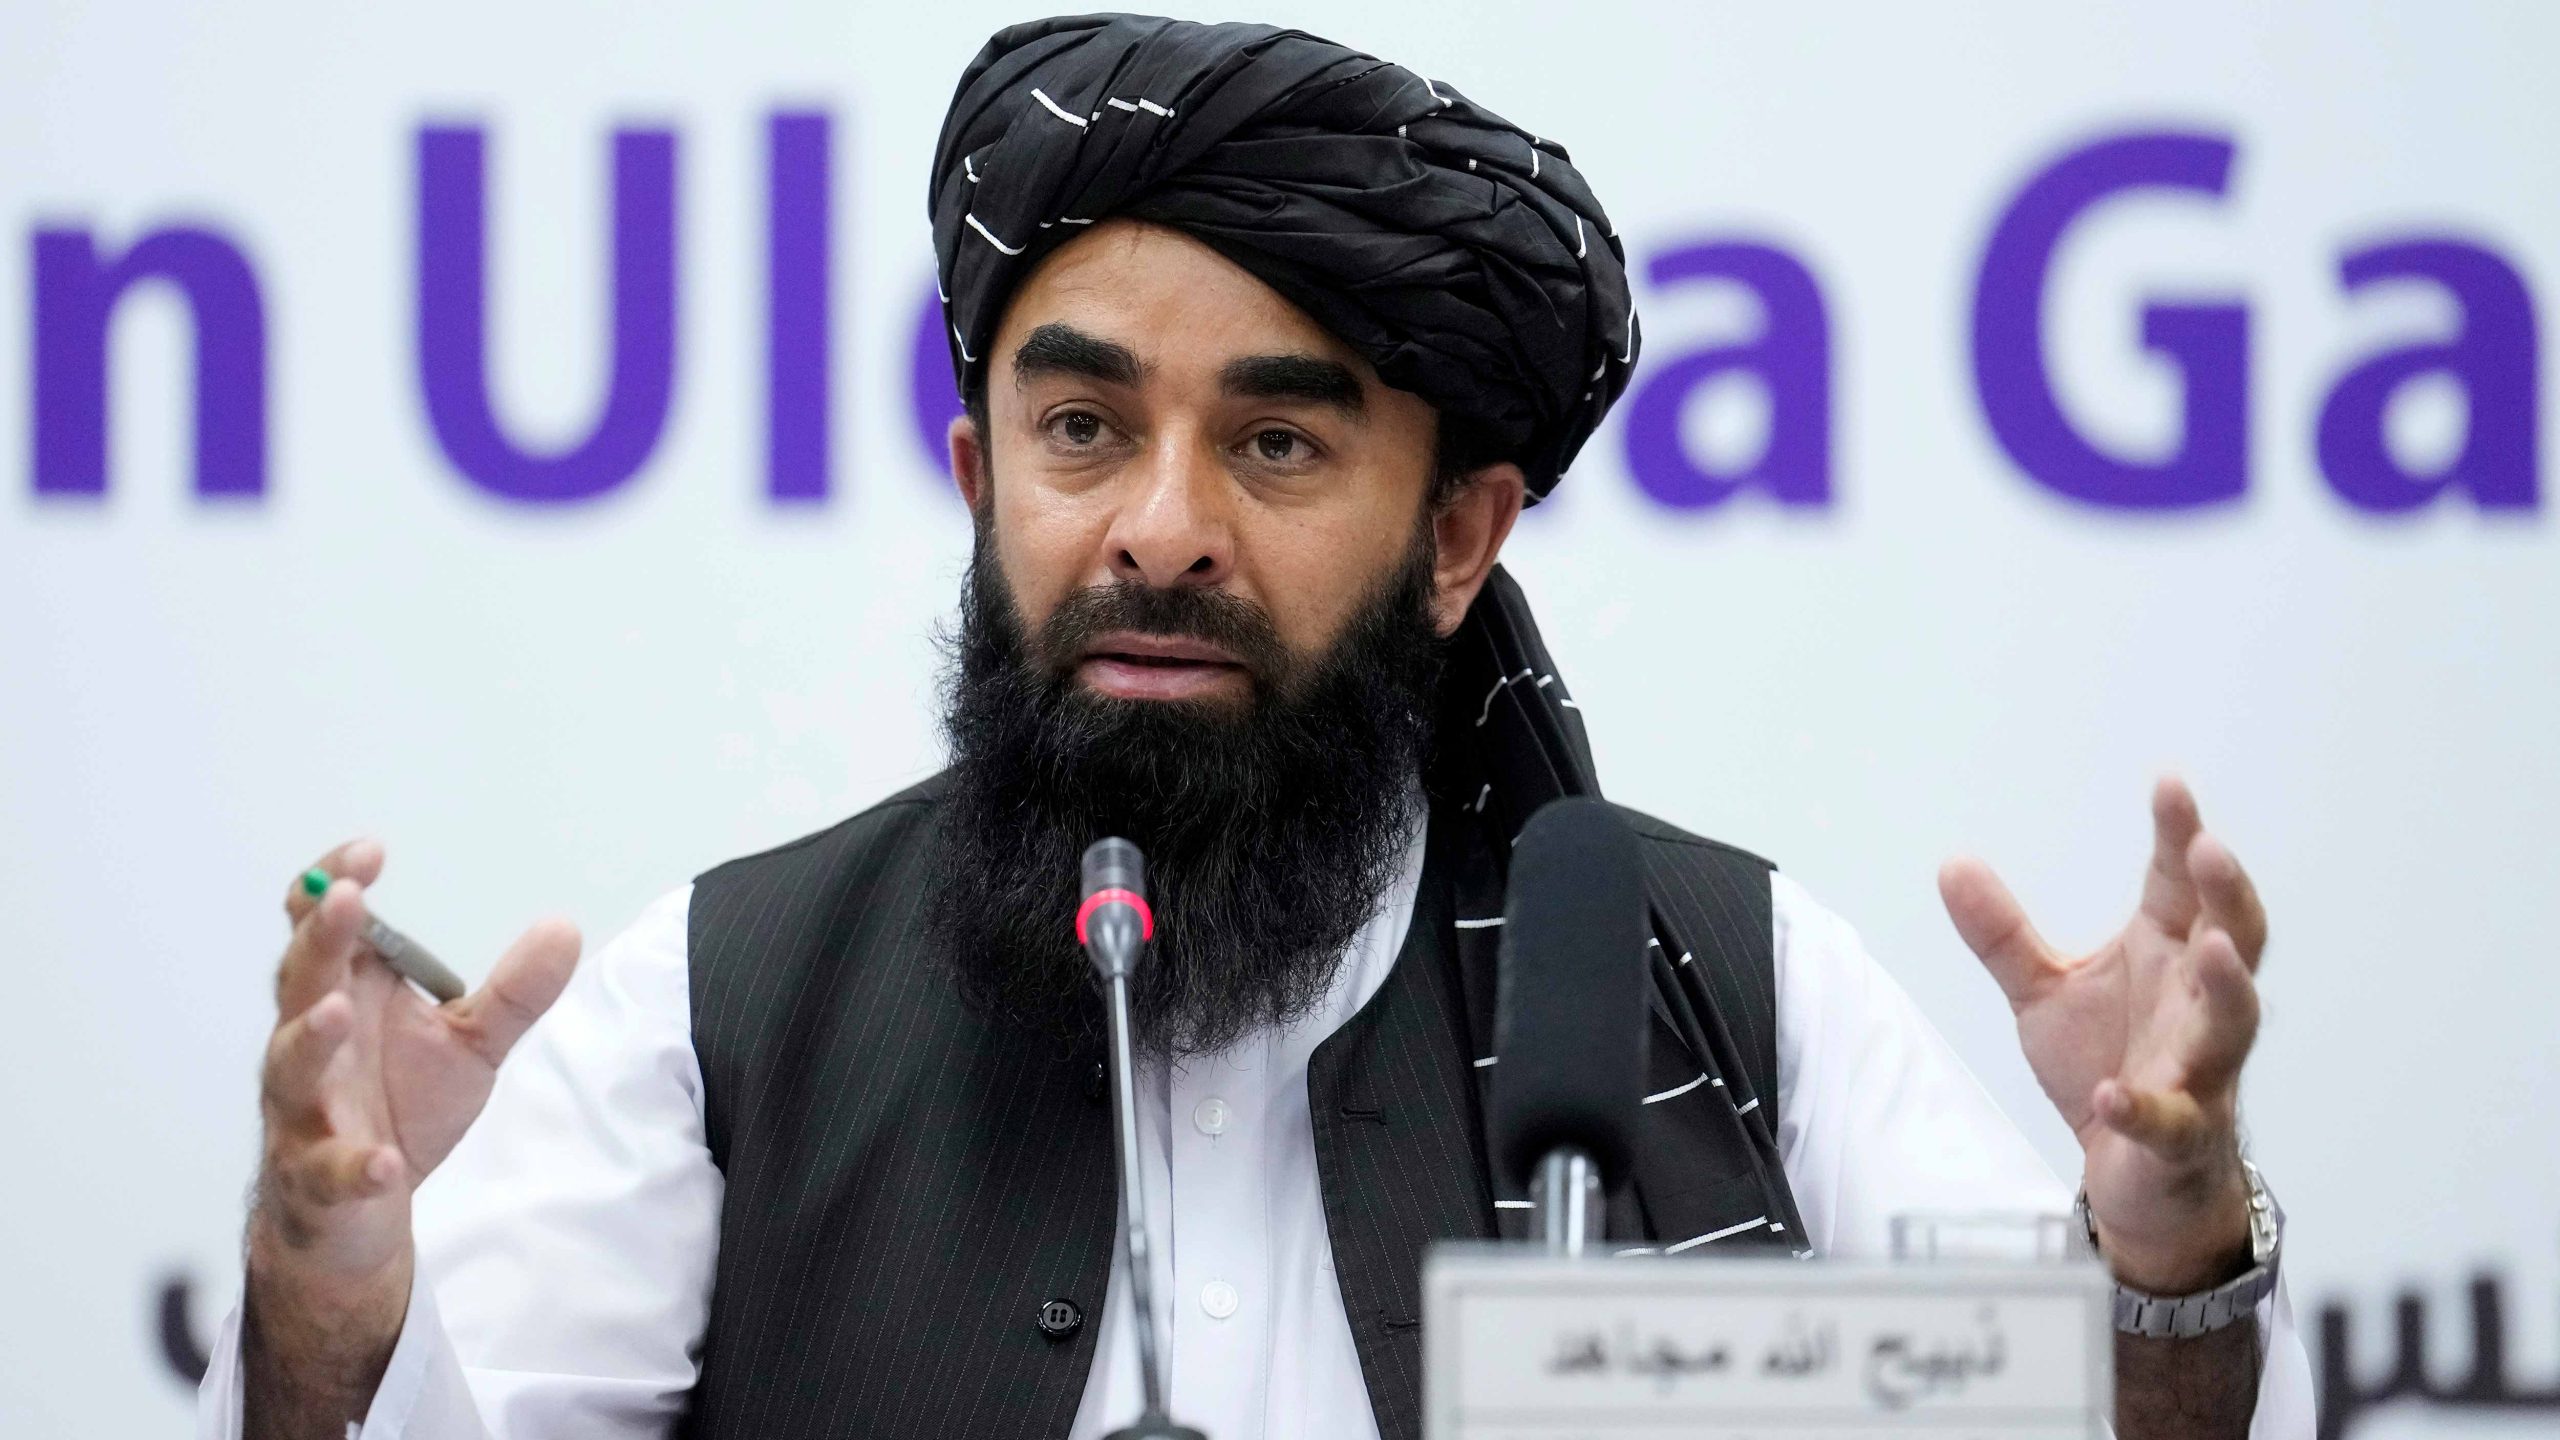 Taliban claims Afghanistan is secure enough for large-scale projects